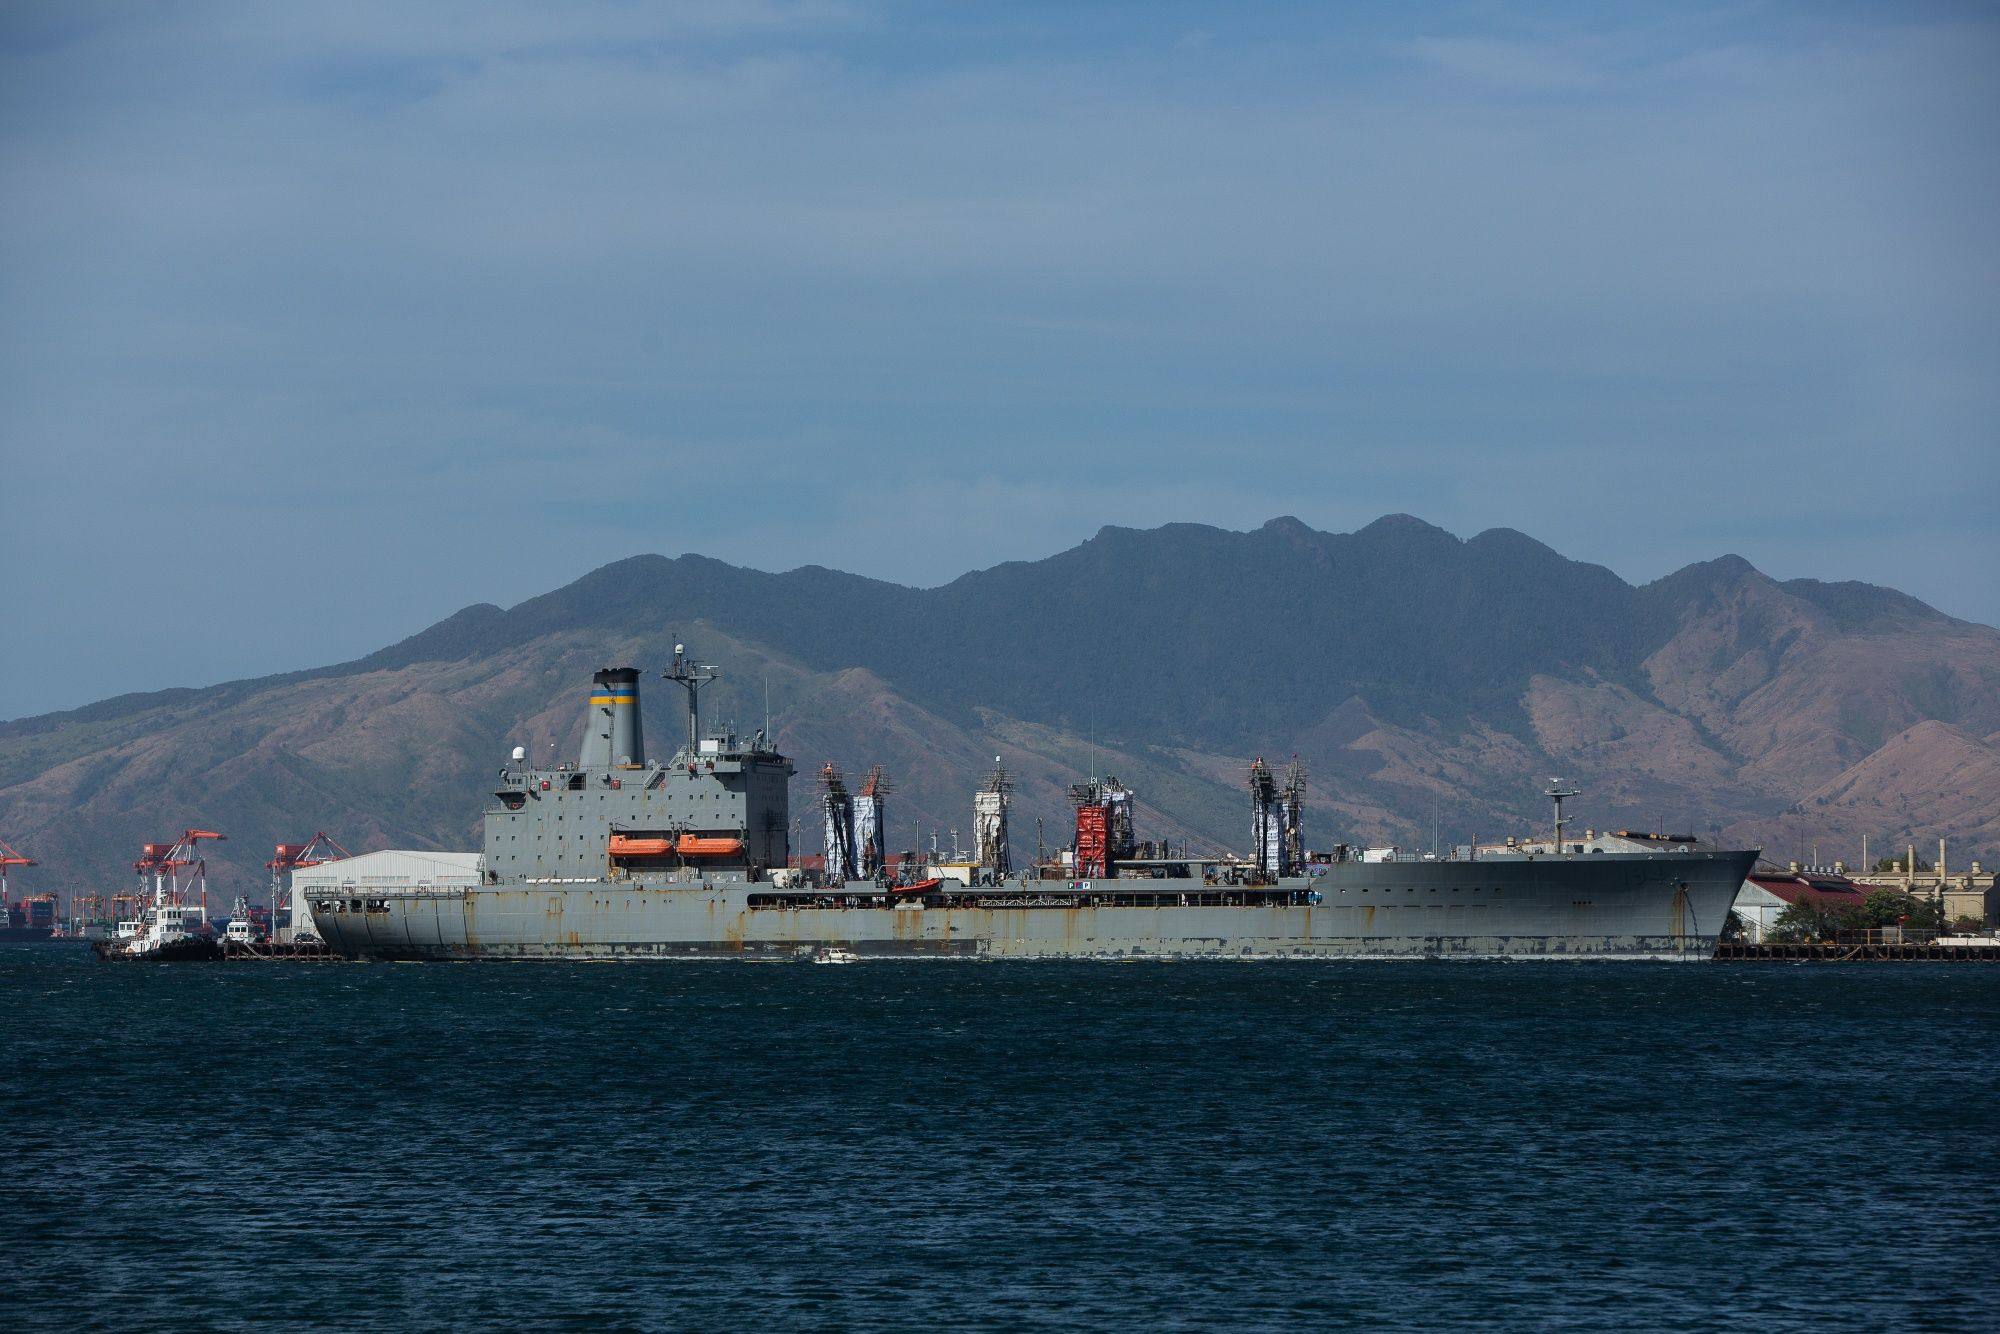 A US supply ship is docked at a shipyard in Subic, Philippines. Photo: Bloomberg